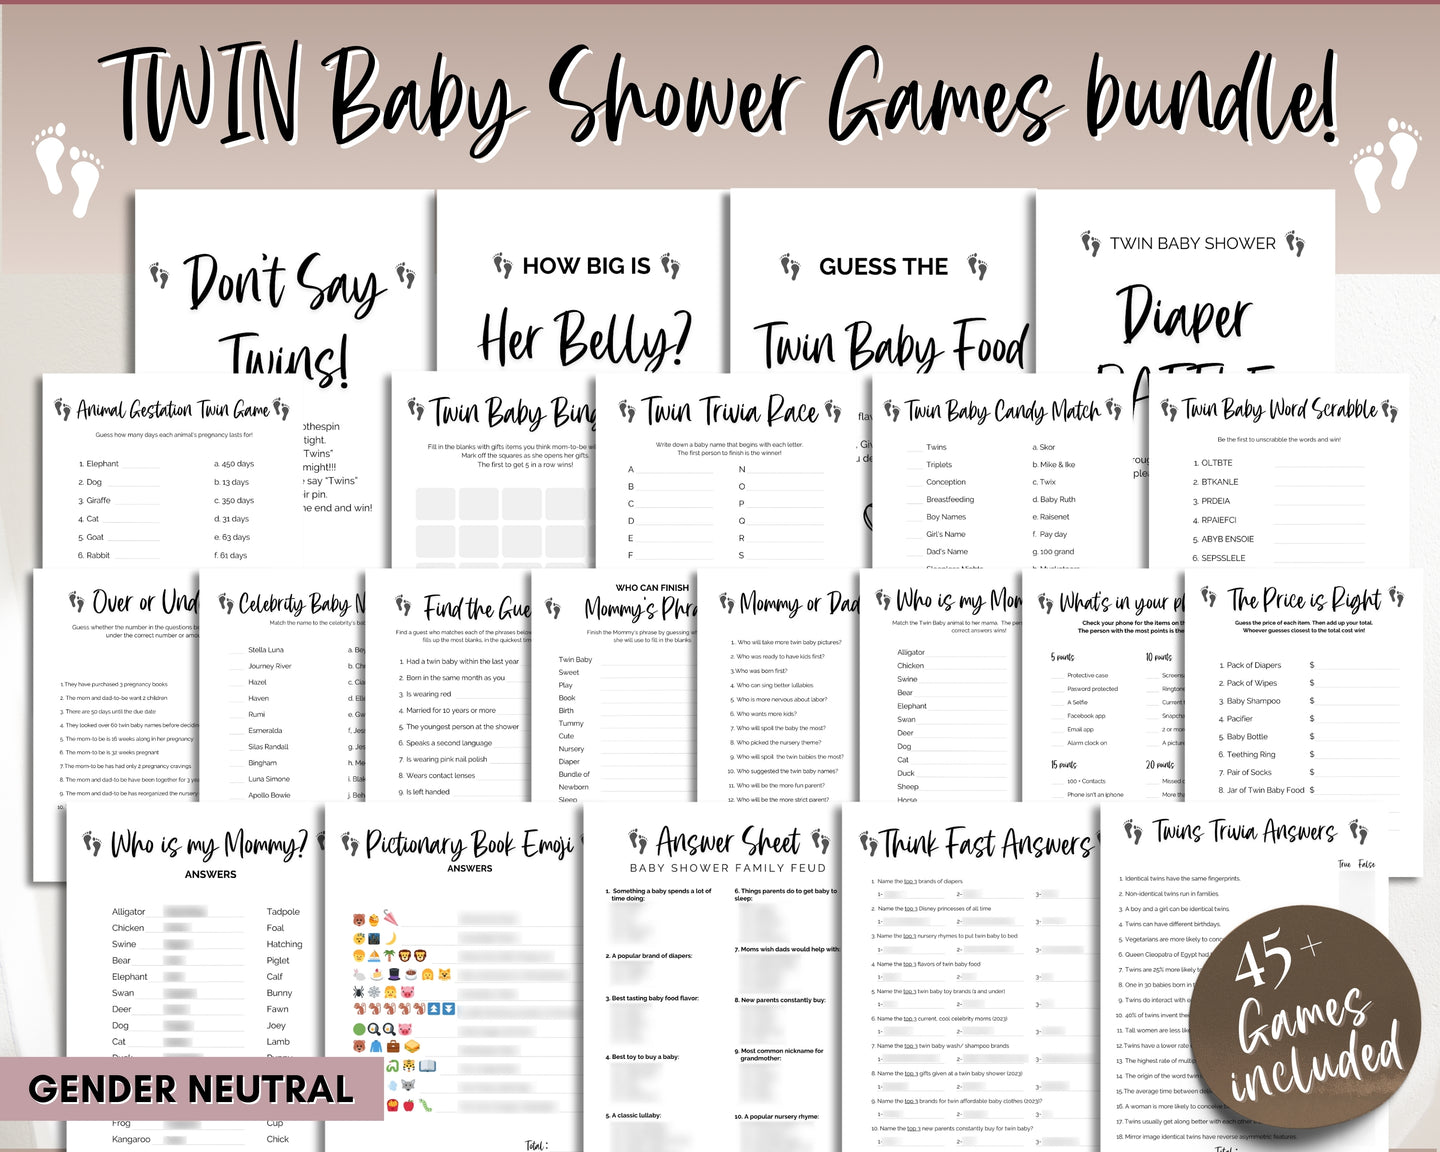 TWIN Baby Shower Games BUNDLE | 45 Twins Baby Shower Activity, Twin Trivia, whats in your purchase, Bingo, Word Scramble, Boho & Woodland Themes